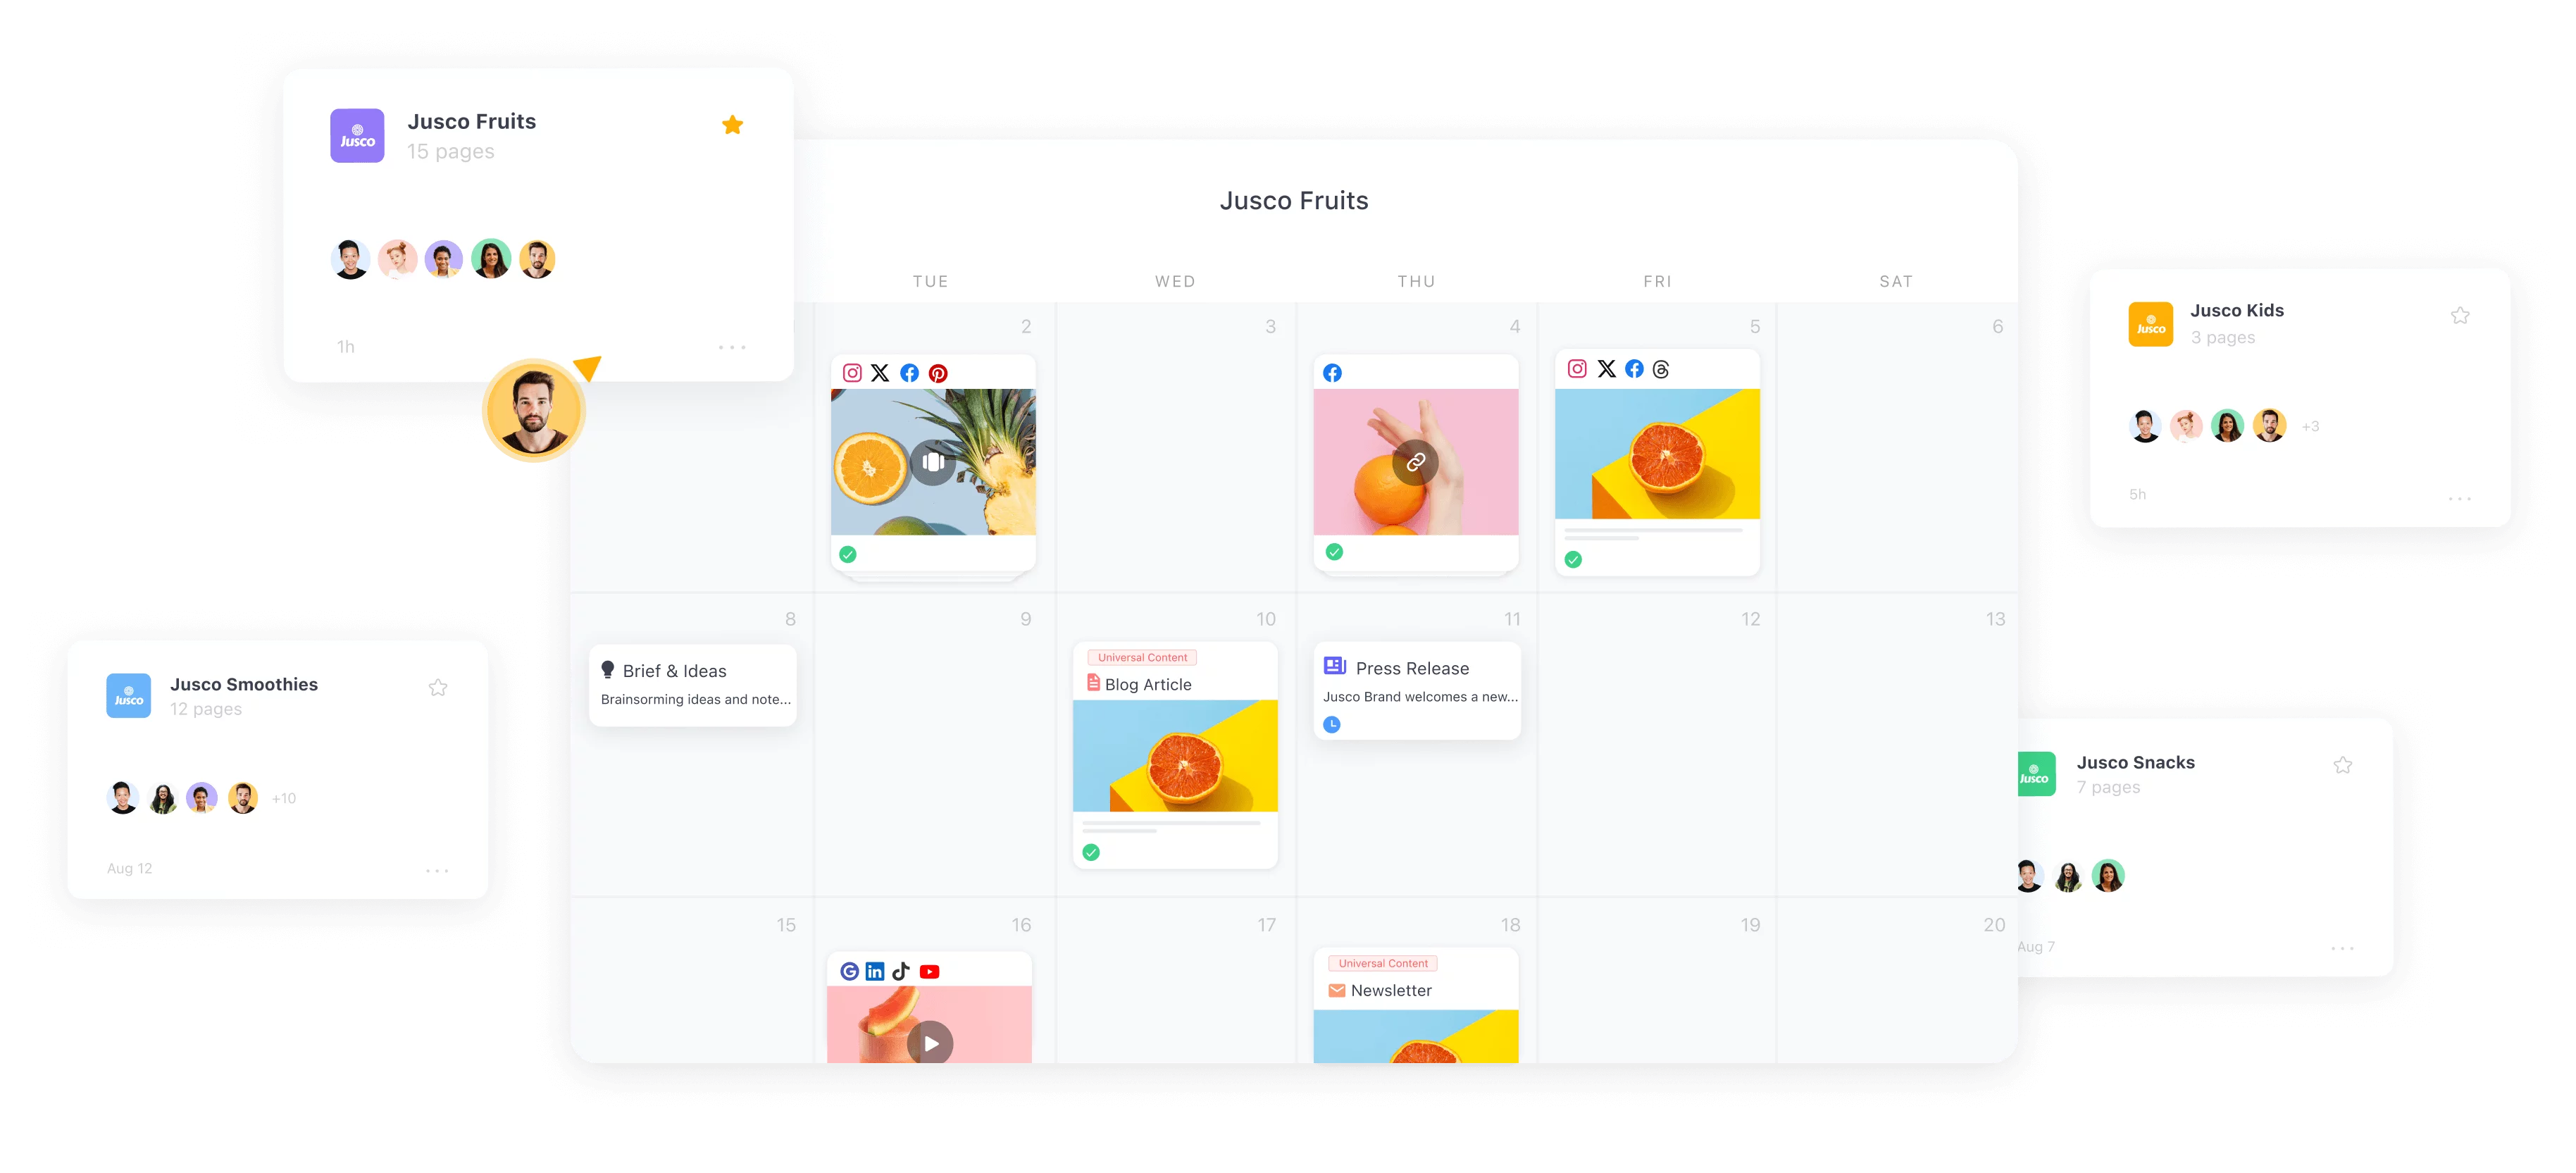 Content calendar showing multiple pages, posts, and workspaces for different brands